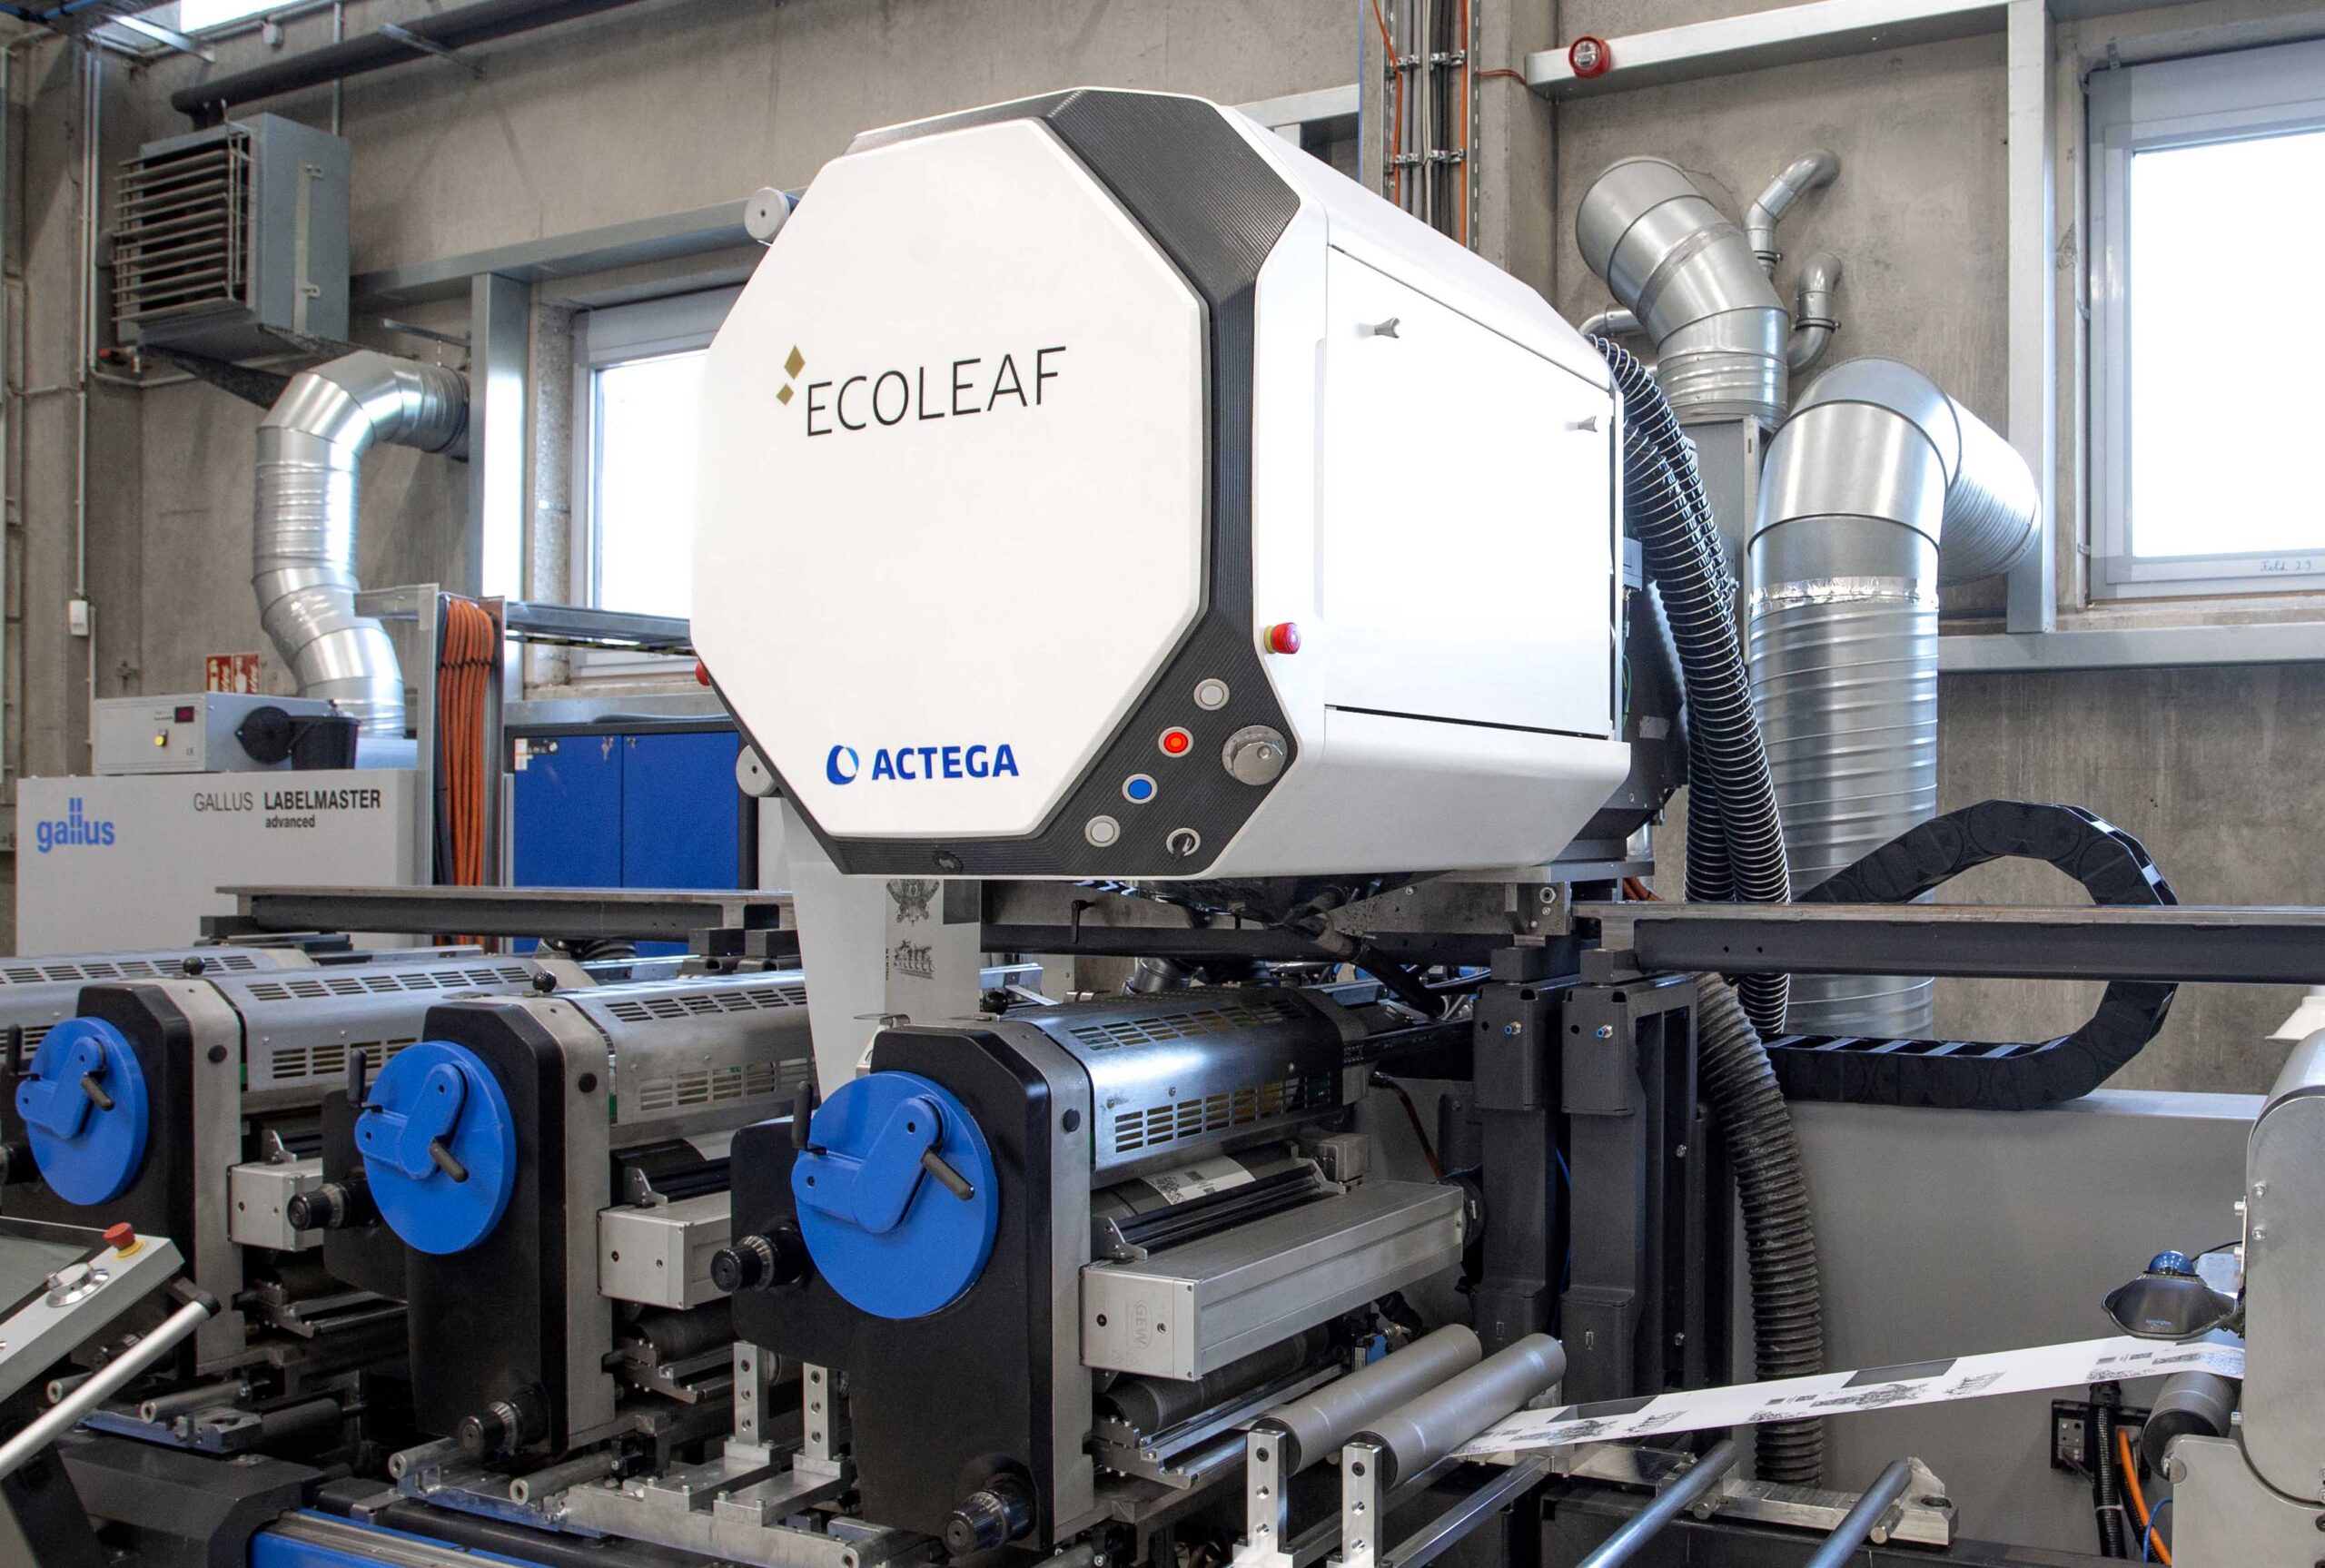 An EcoLeaf press installed at a manufacturing site.